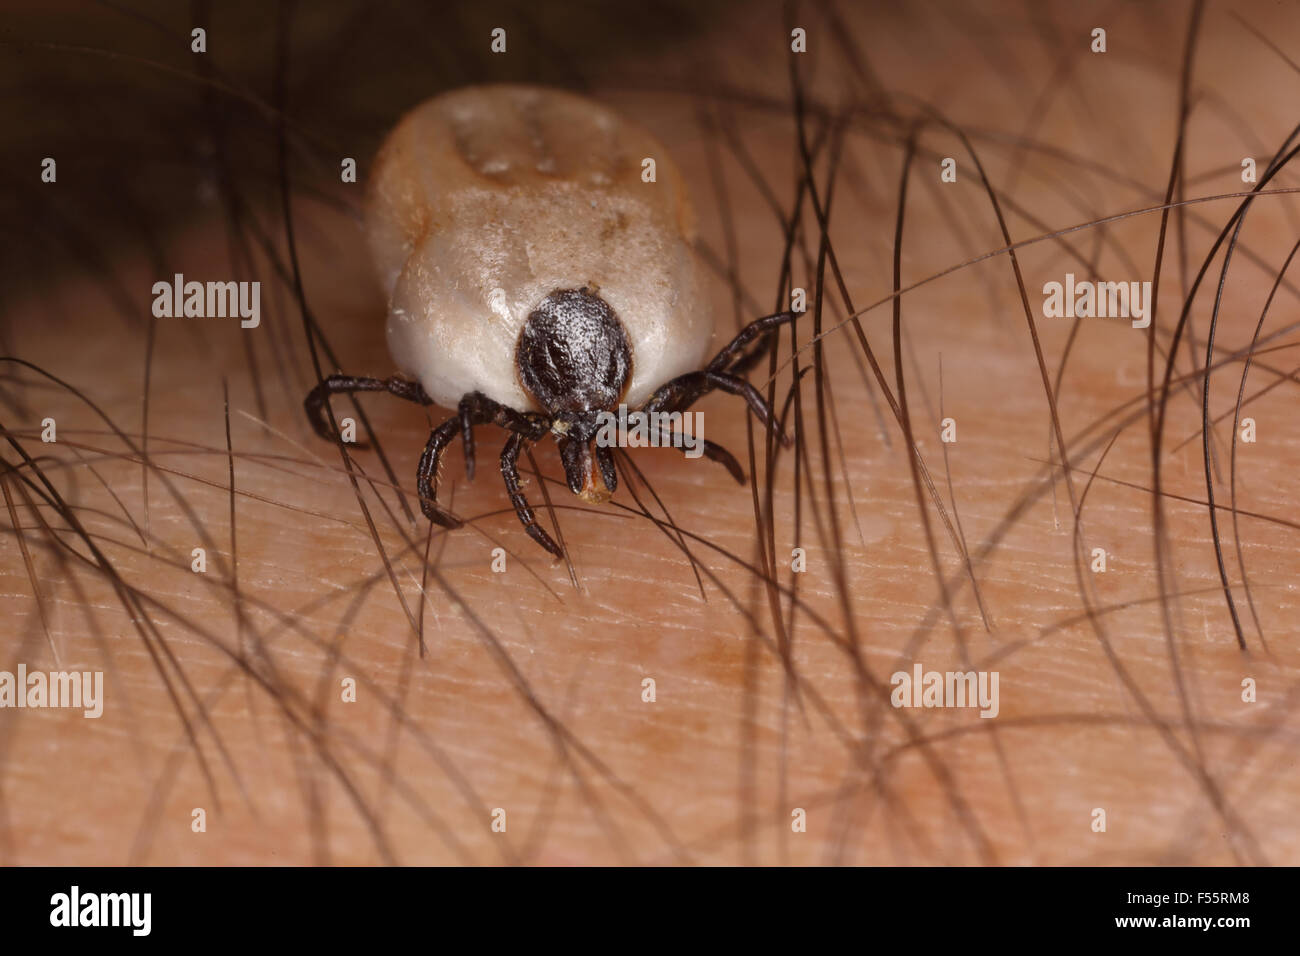 25.04.2015, Berlin , Berlin , Germany  - Moderately soaked tick on human skin. 00S150425D248CAROEX.JPG - NOT for SALE in G E R M A N Y, A U S T R I A, S W I T Z E R L A N D [MODEL RELEASE: YES, PROPERTY RELEASE: NOT APPLICABLE (c) caro photo agency / Sorge, http://www.caro-images.pl, info@carofoto.pl - In case of using the picture for non-journalistic purposes, please contact the agency - the picture is subject to royalty!] Stock Photo